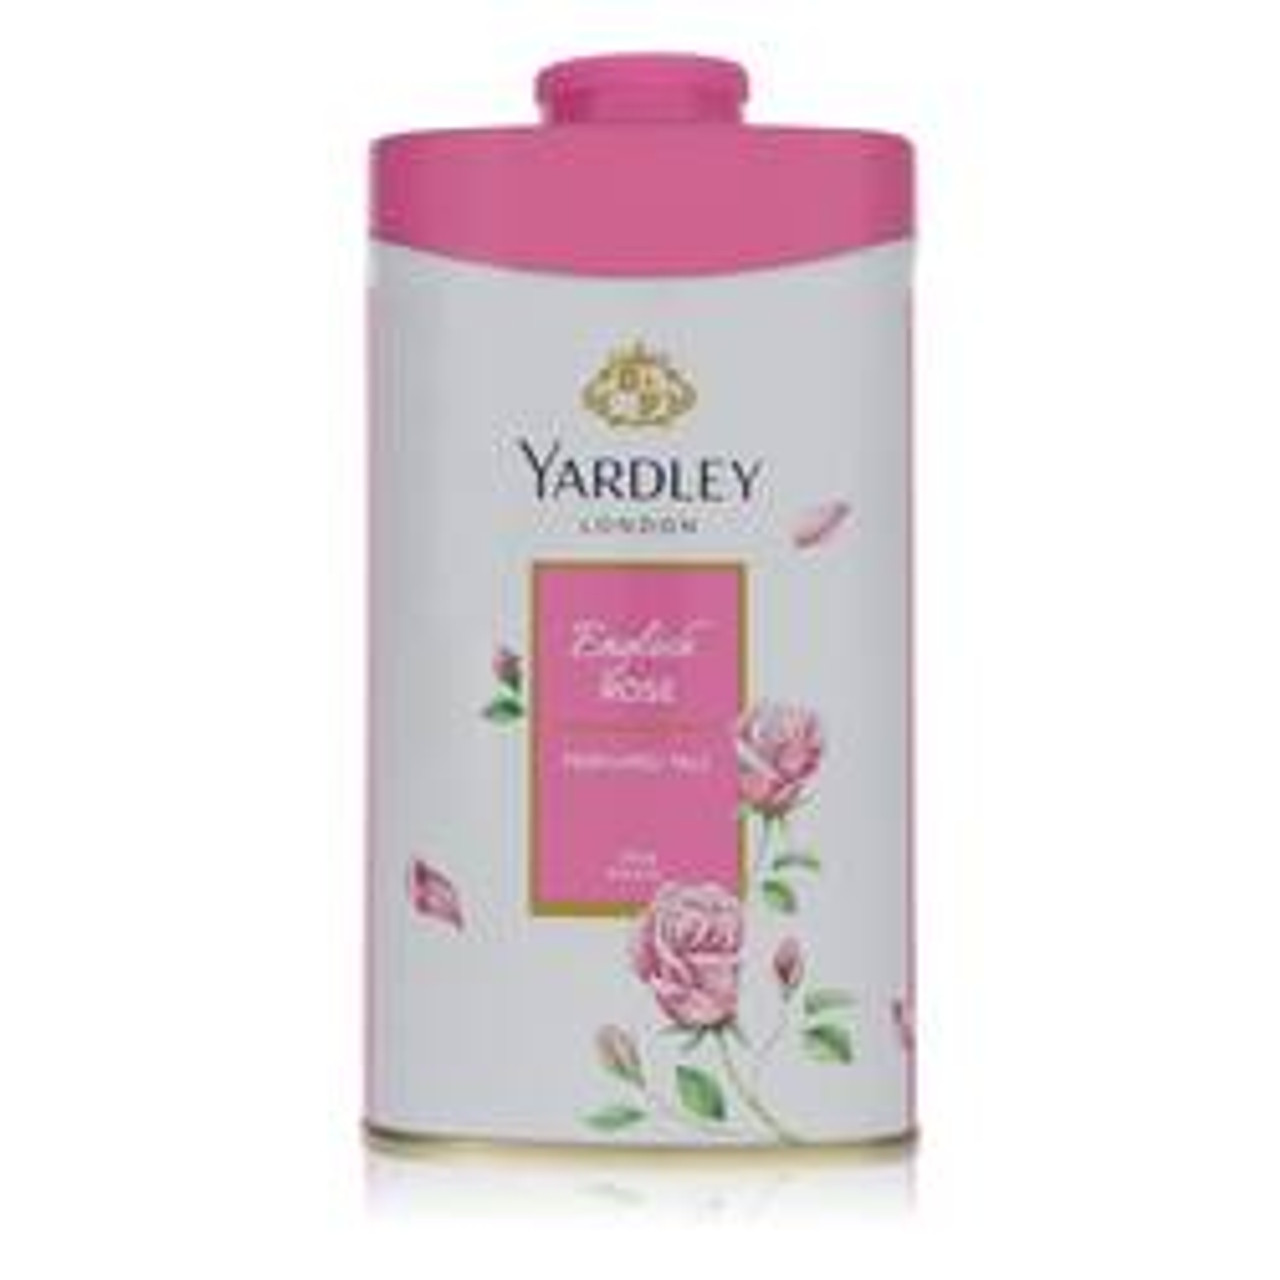 English Rose Yardley Perfume By Yardley London Perfumed Talc 8.8 oz for Women - [From 43.00 - Choose pk Qty ] - *Ships from Miami